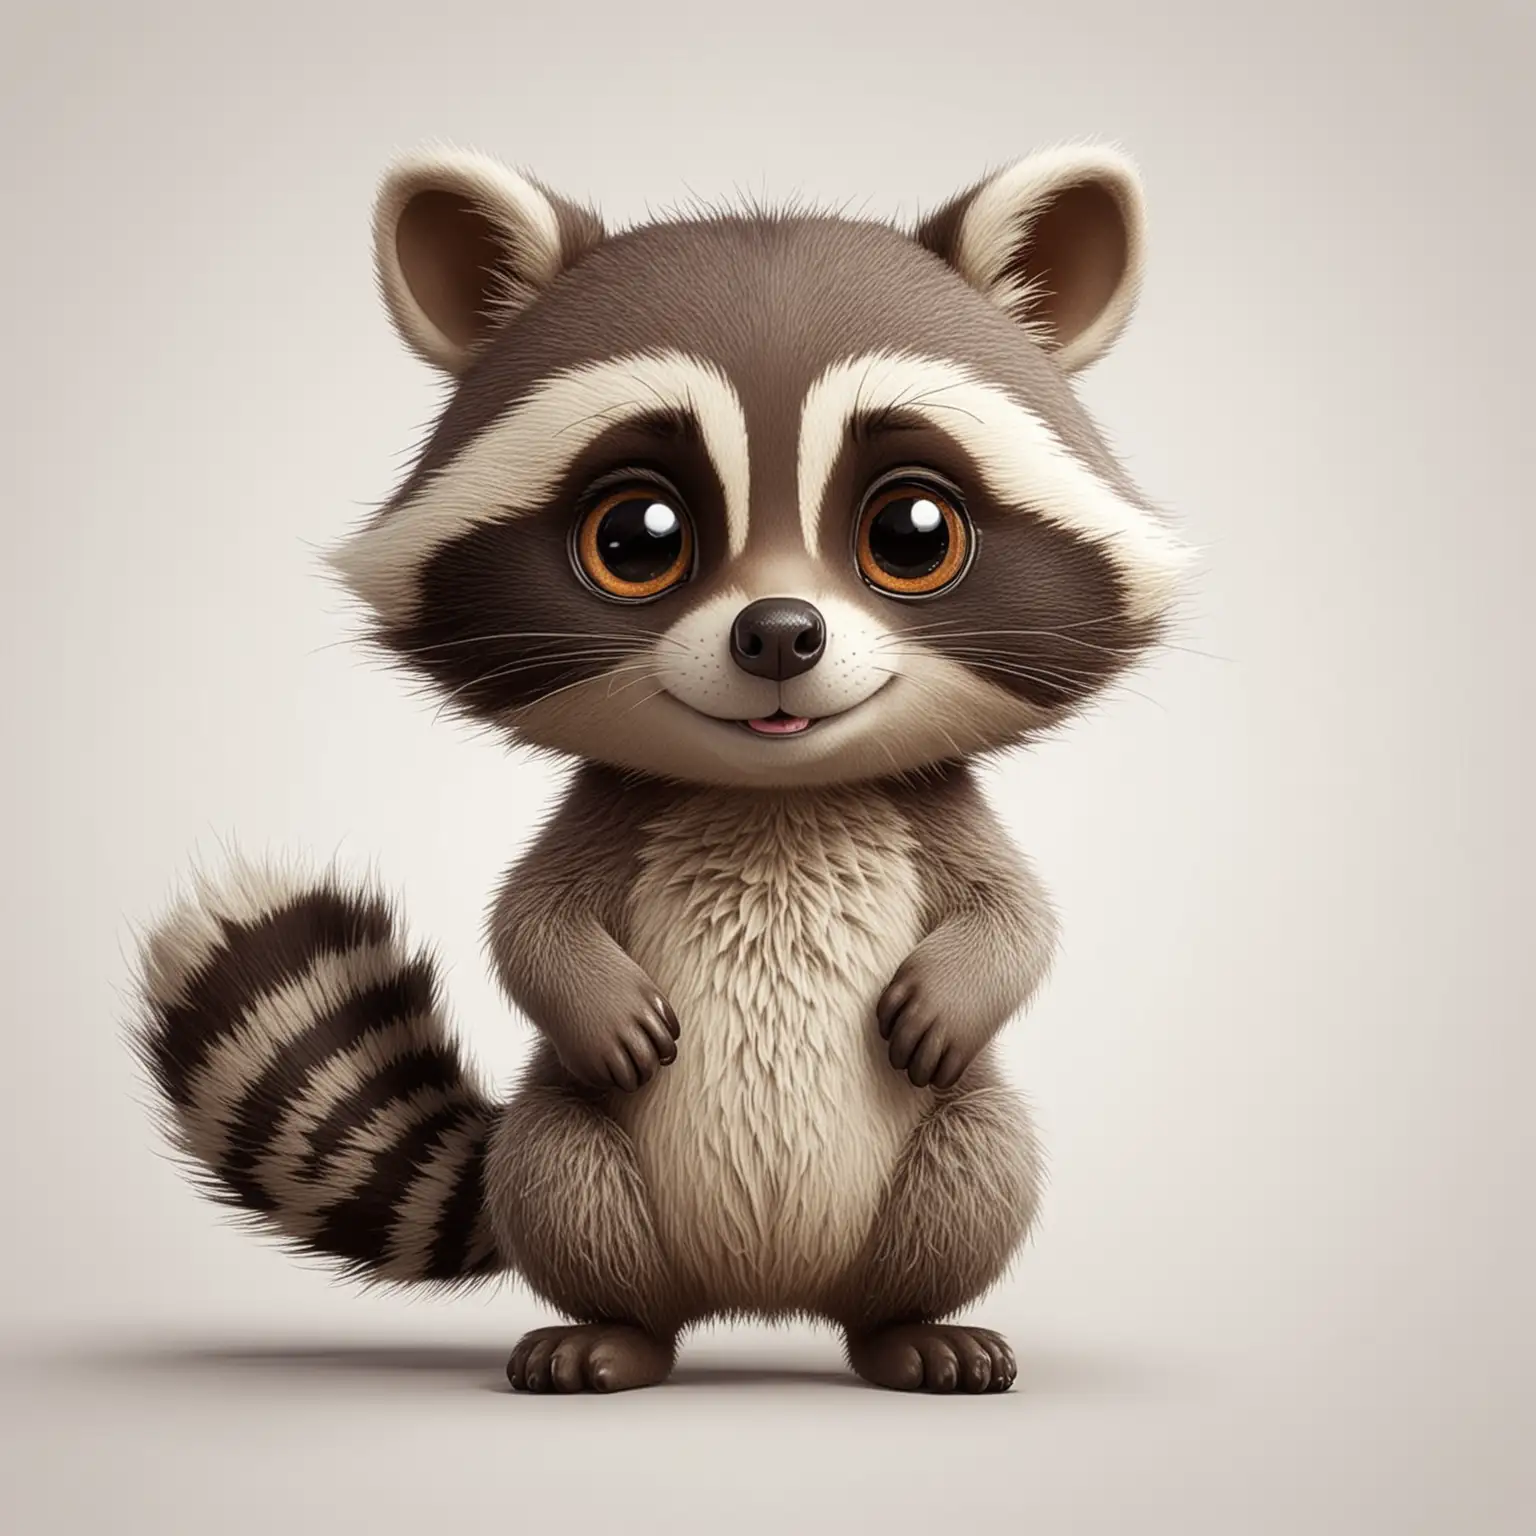 Adorable Cartoon Raccoon on a White Background